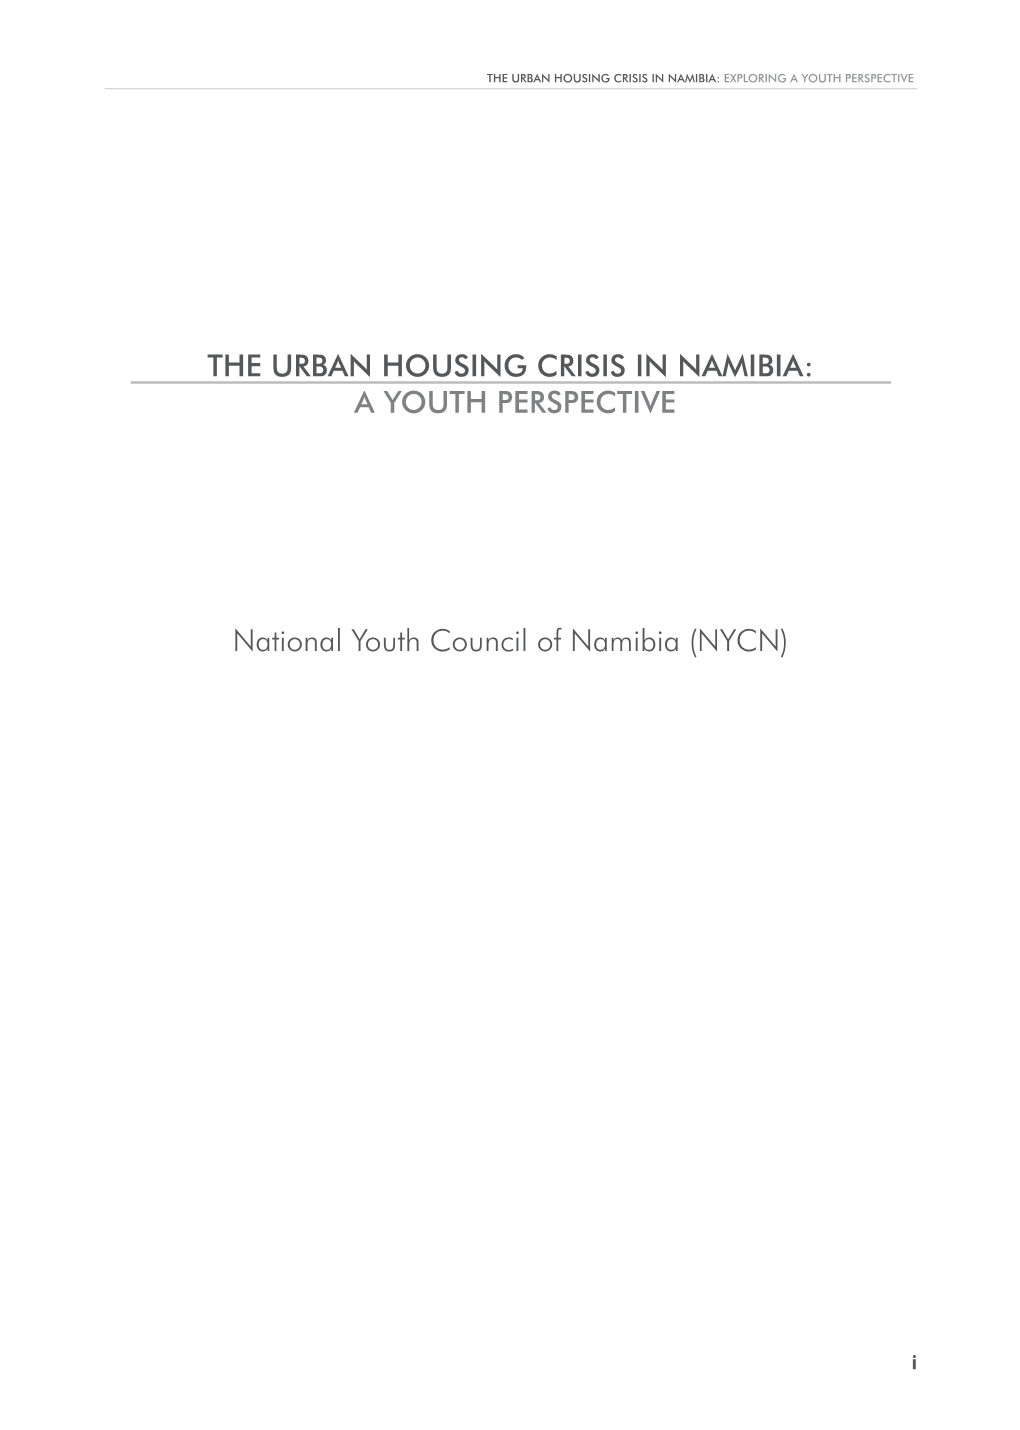 The Urban Housing Crisis in Namibia: a Youth Perspective